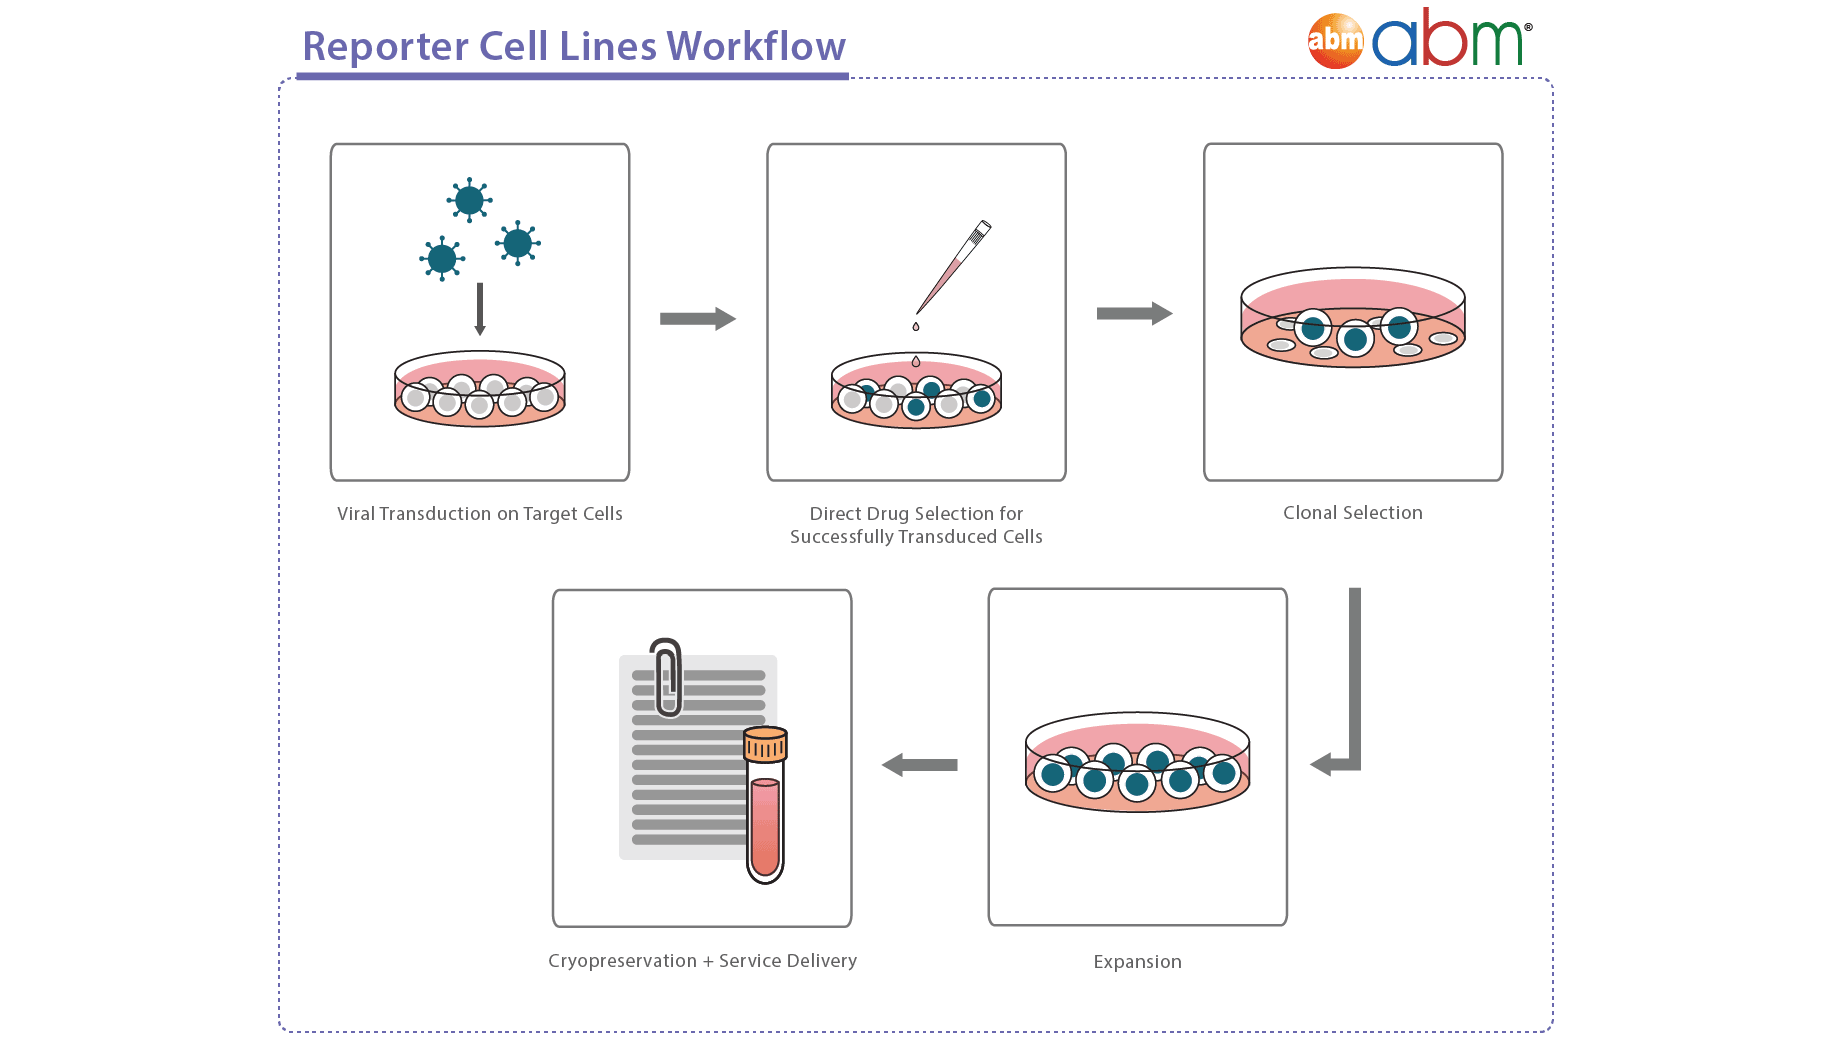 Reporter Cell Workflow